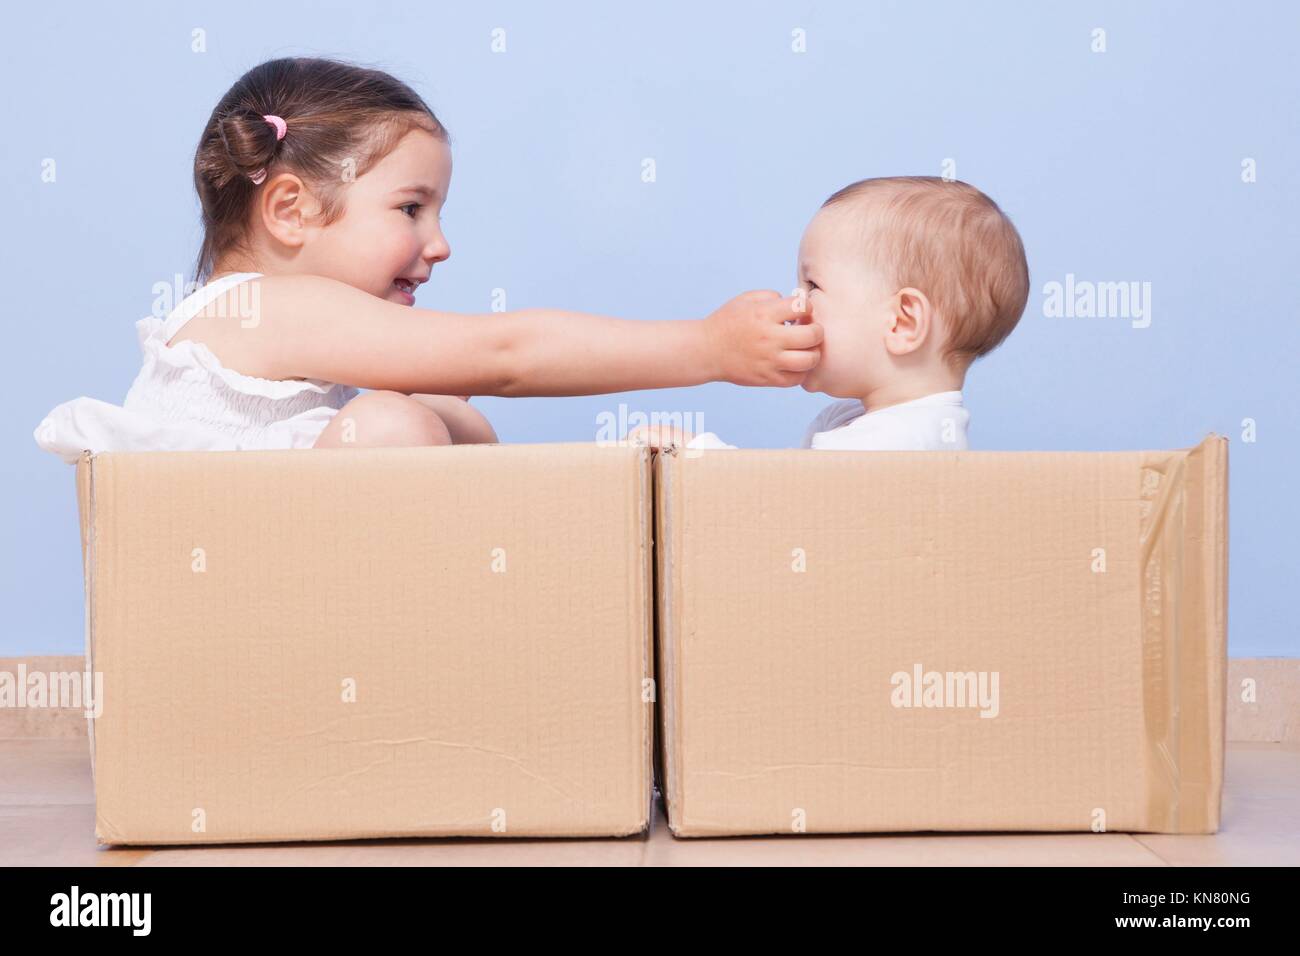 Baby brother and toddler sister playing in cardboard boxes. Stock Photo